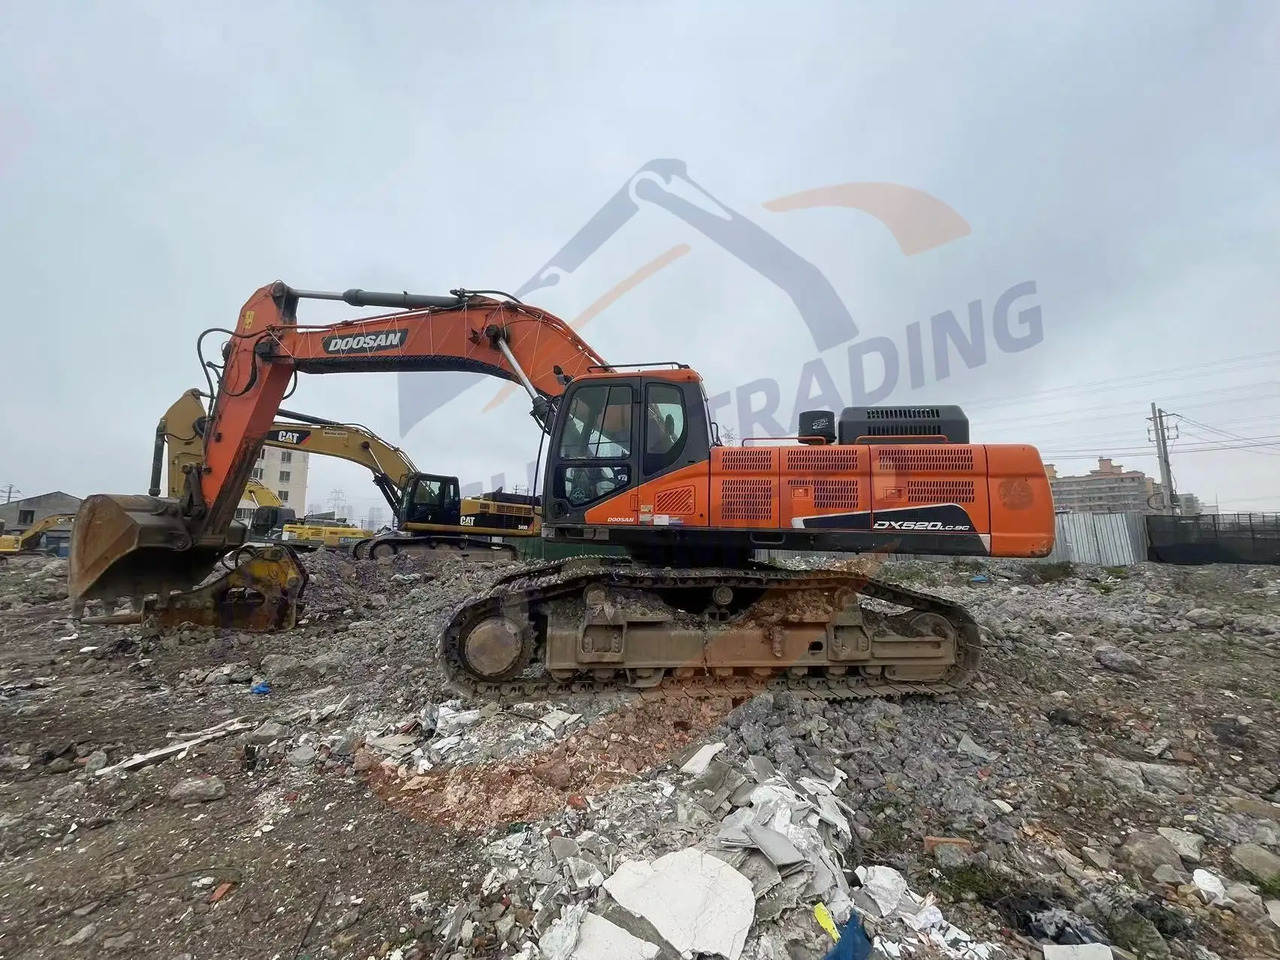 Pelle sur chenille Low running hours Used Doosan excavator DX520LC-9C in good condition for sale: photos 4